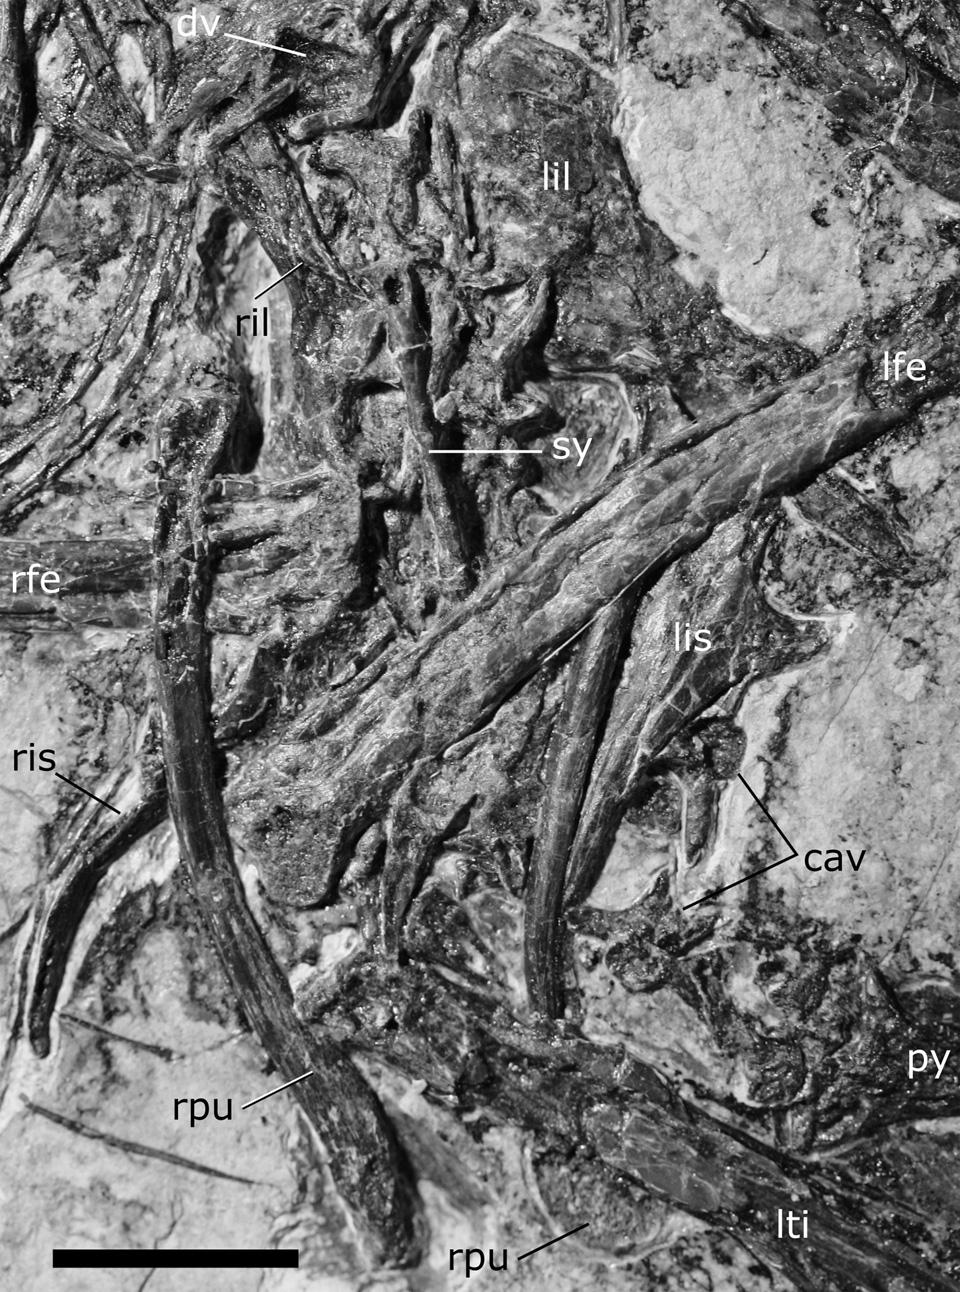 HU ET AL. NEW CRETACEOUS BIRD FROM CHINA FIGURE 3. Close-up photographs of the synsacrum and pelvic girdle of Bohaiornis guoi holotype (LPM-B00167).